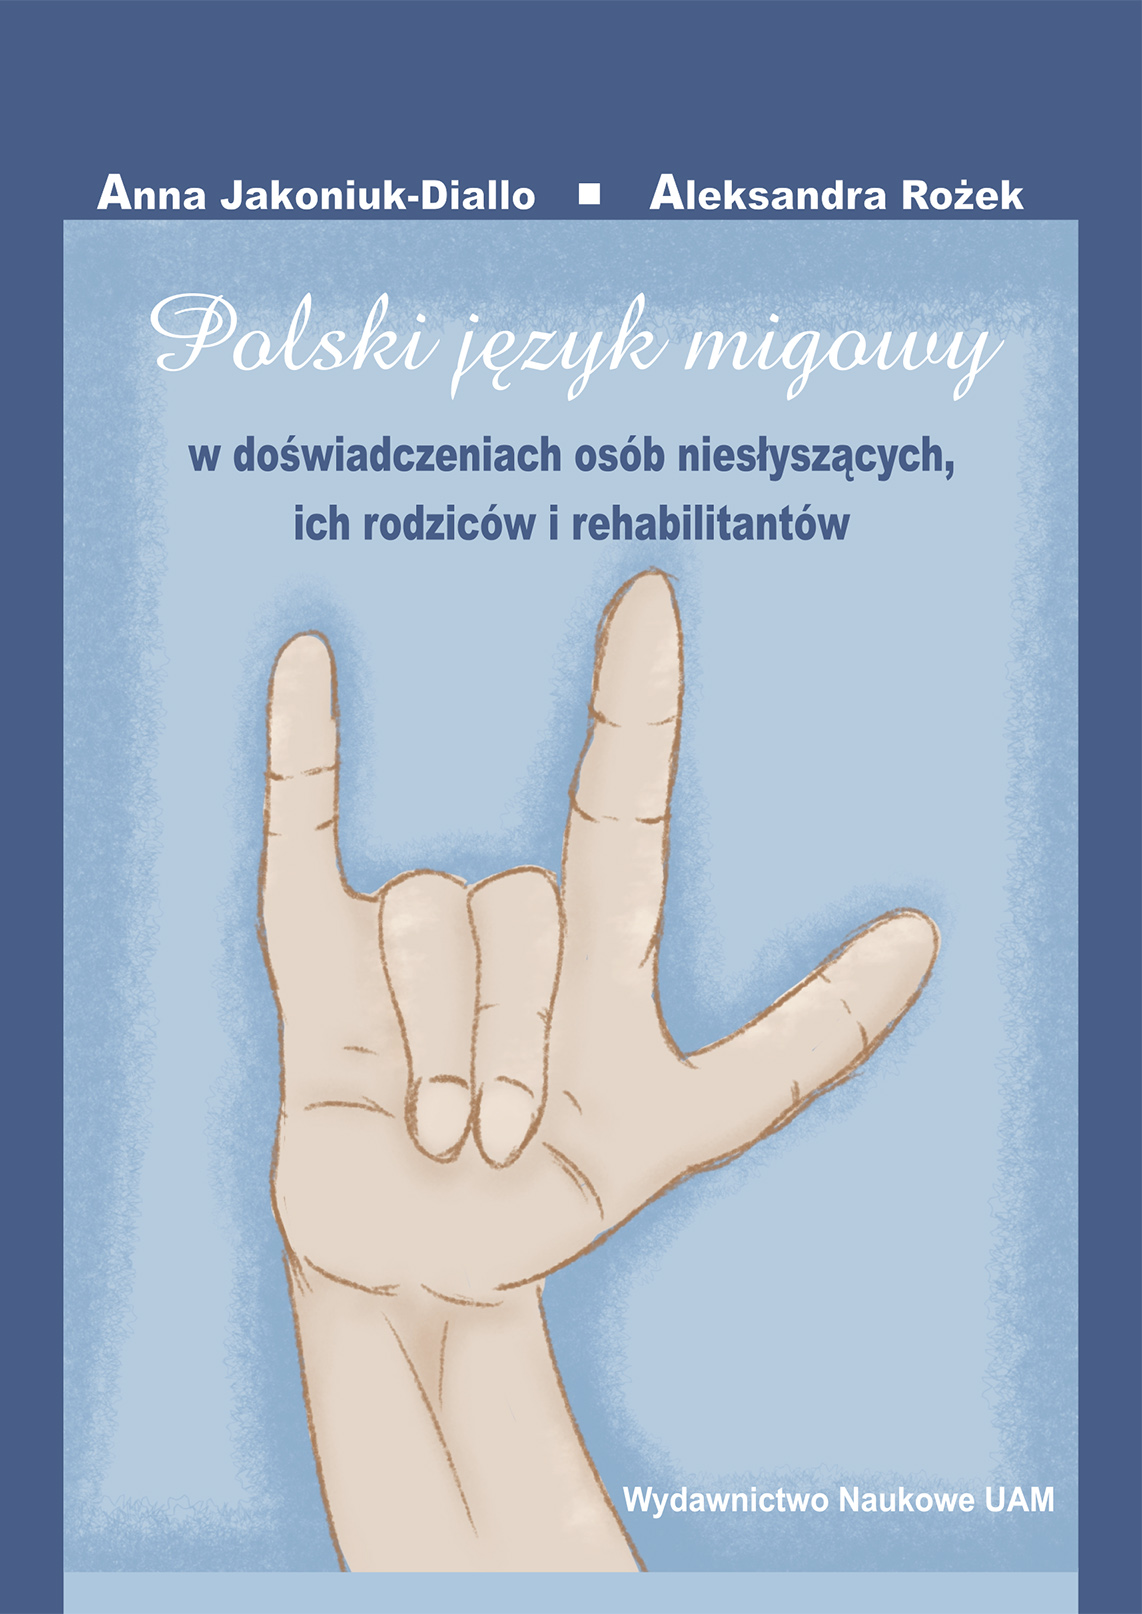 Polish Sign Language in the Experiences of People with Hearing Impairment, their Parents and Rehabilitators Cover Image